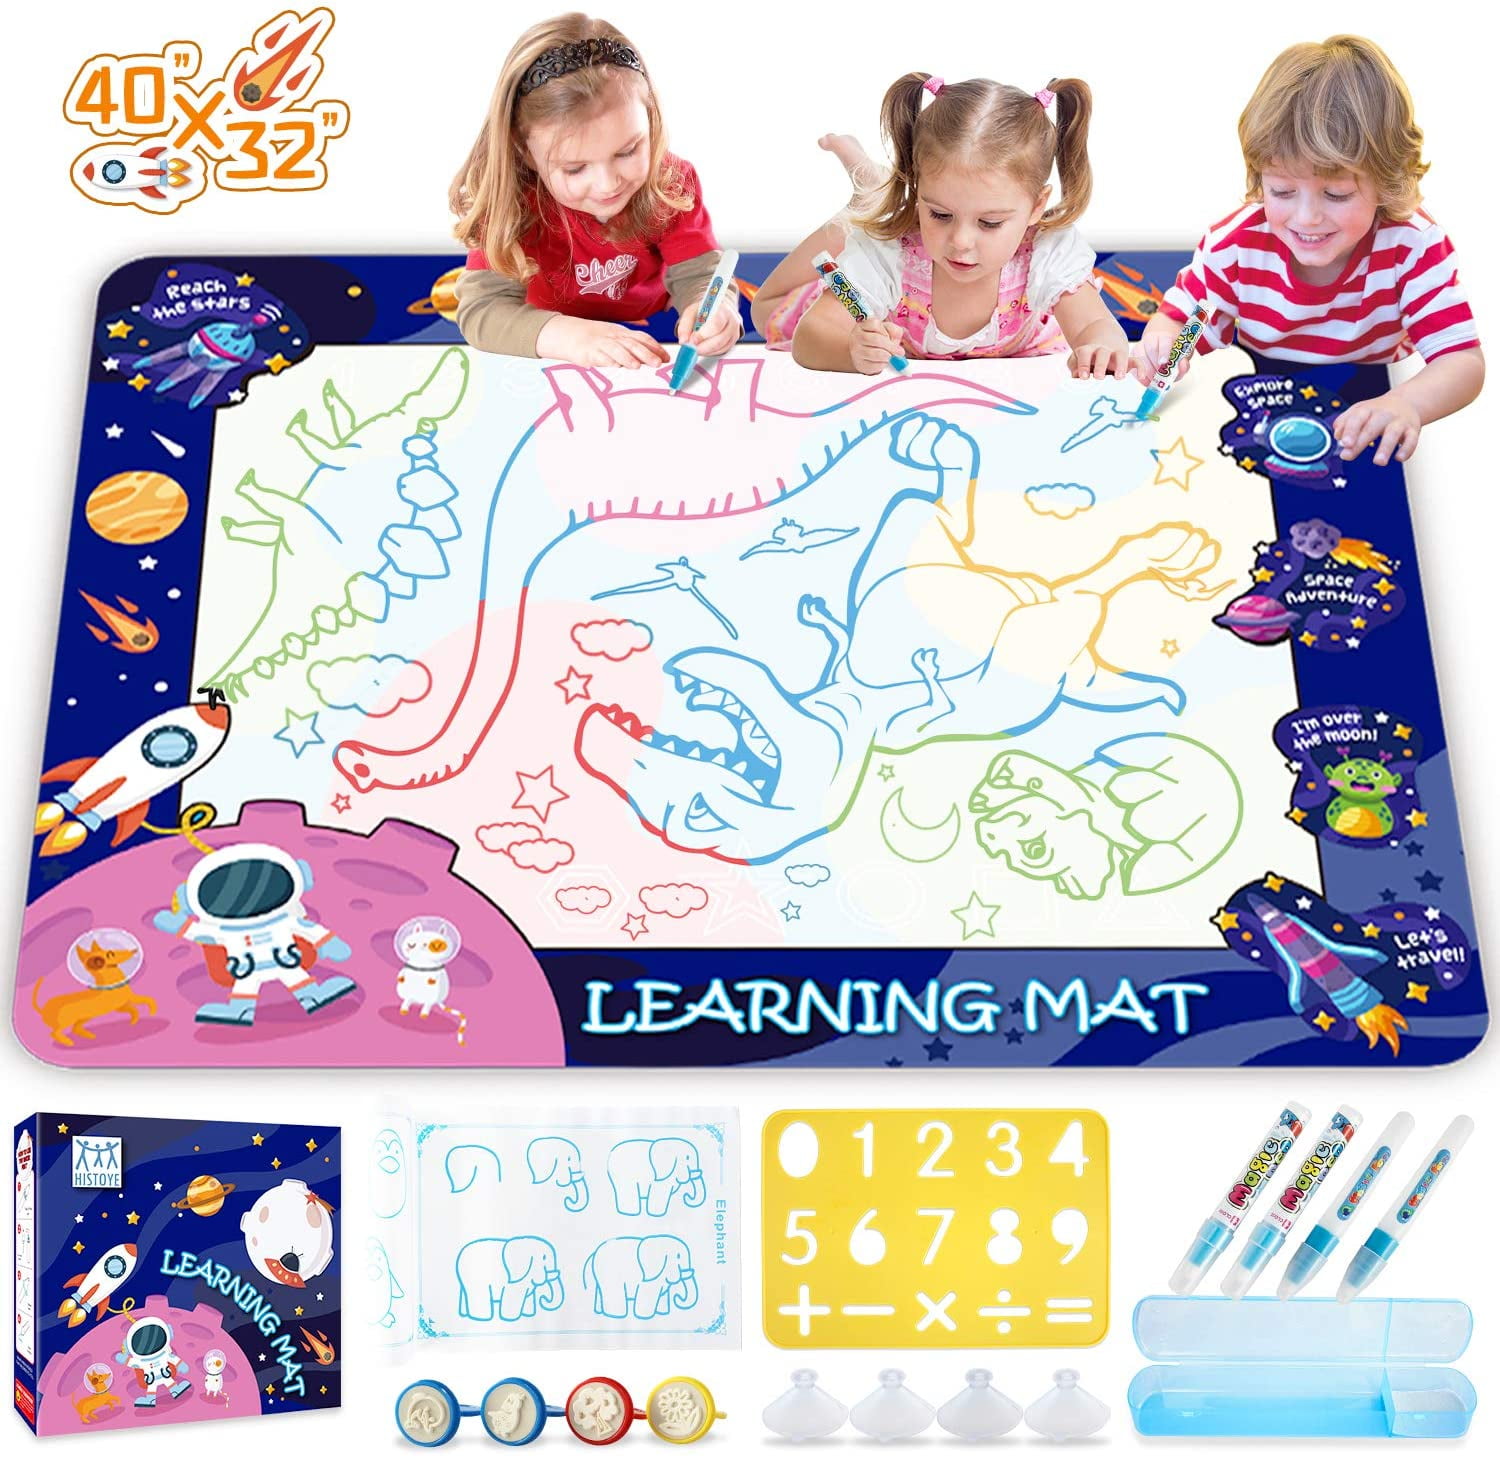 40 x 32 Aqua Magic Water Doodle Mat 5 Magic Water Pens and Drawing Accessories Theefun Water Drawing Mat Toddlers Painting Board Writing Mat with 6 Magic Stamps